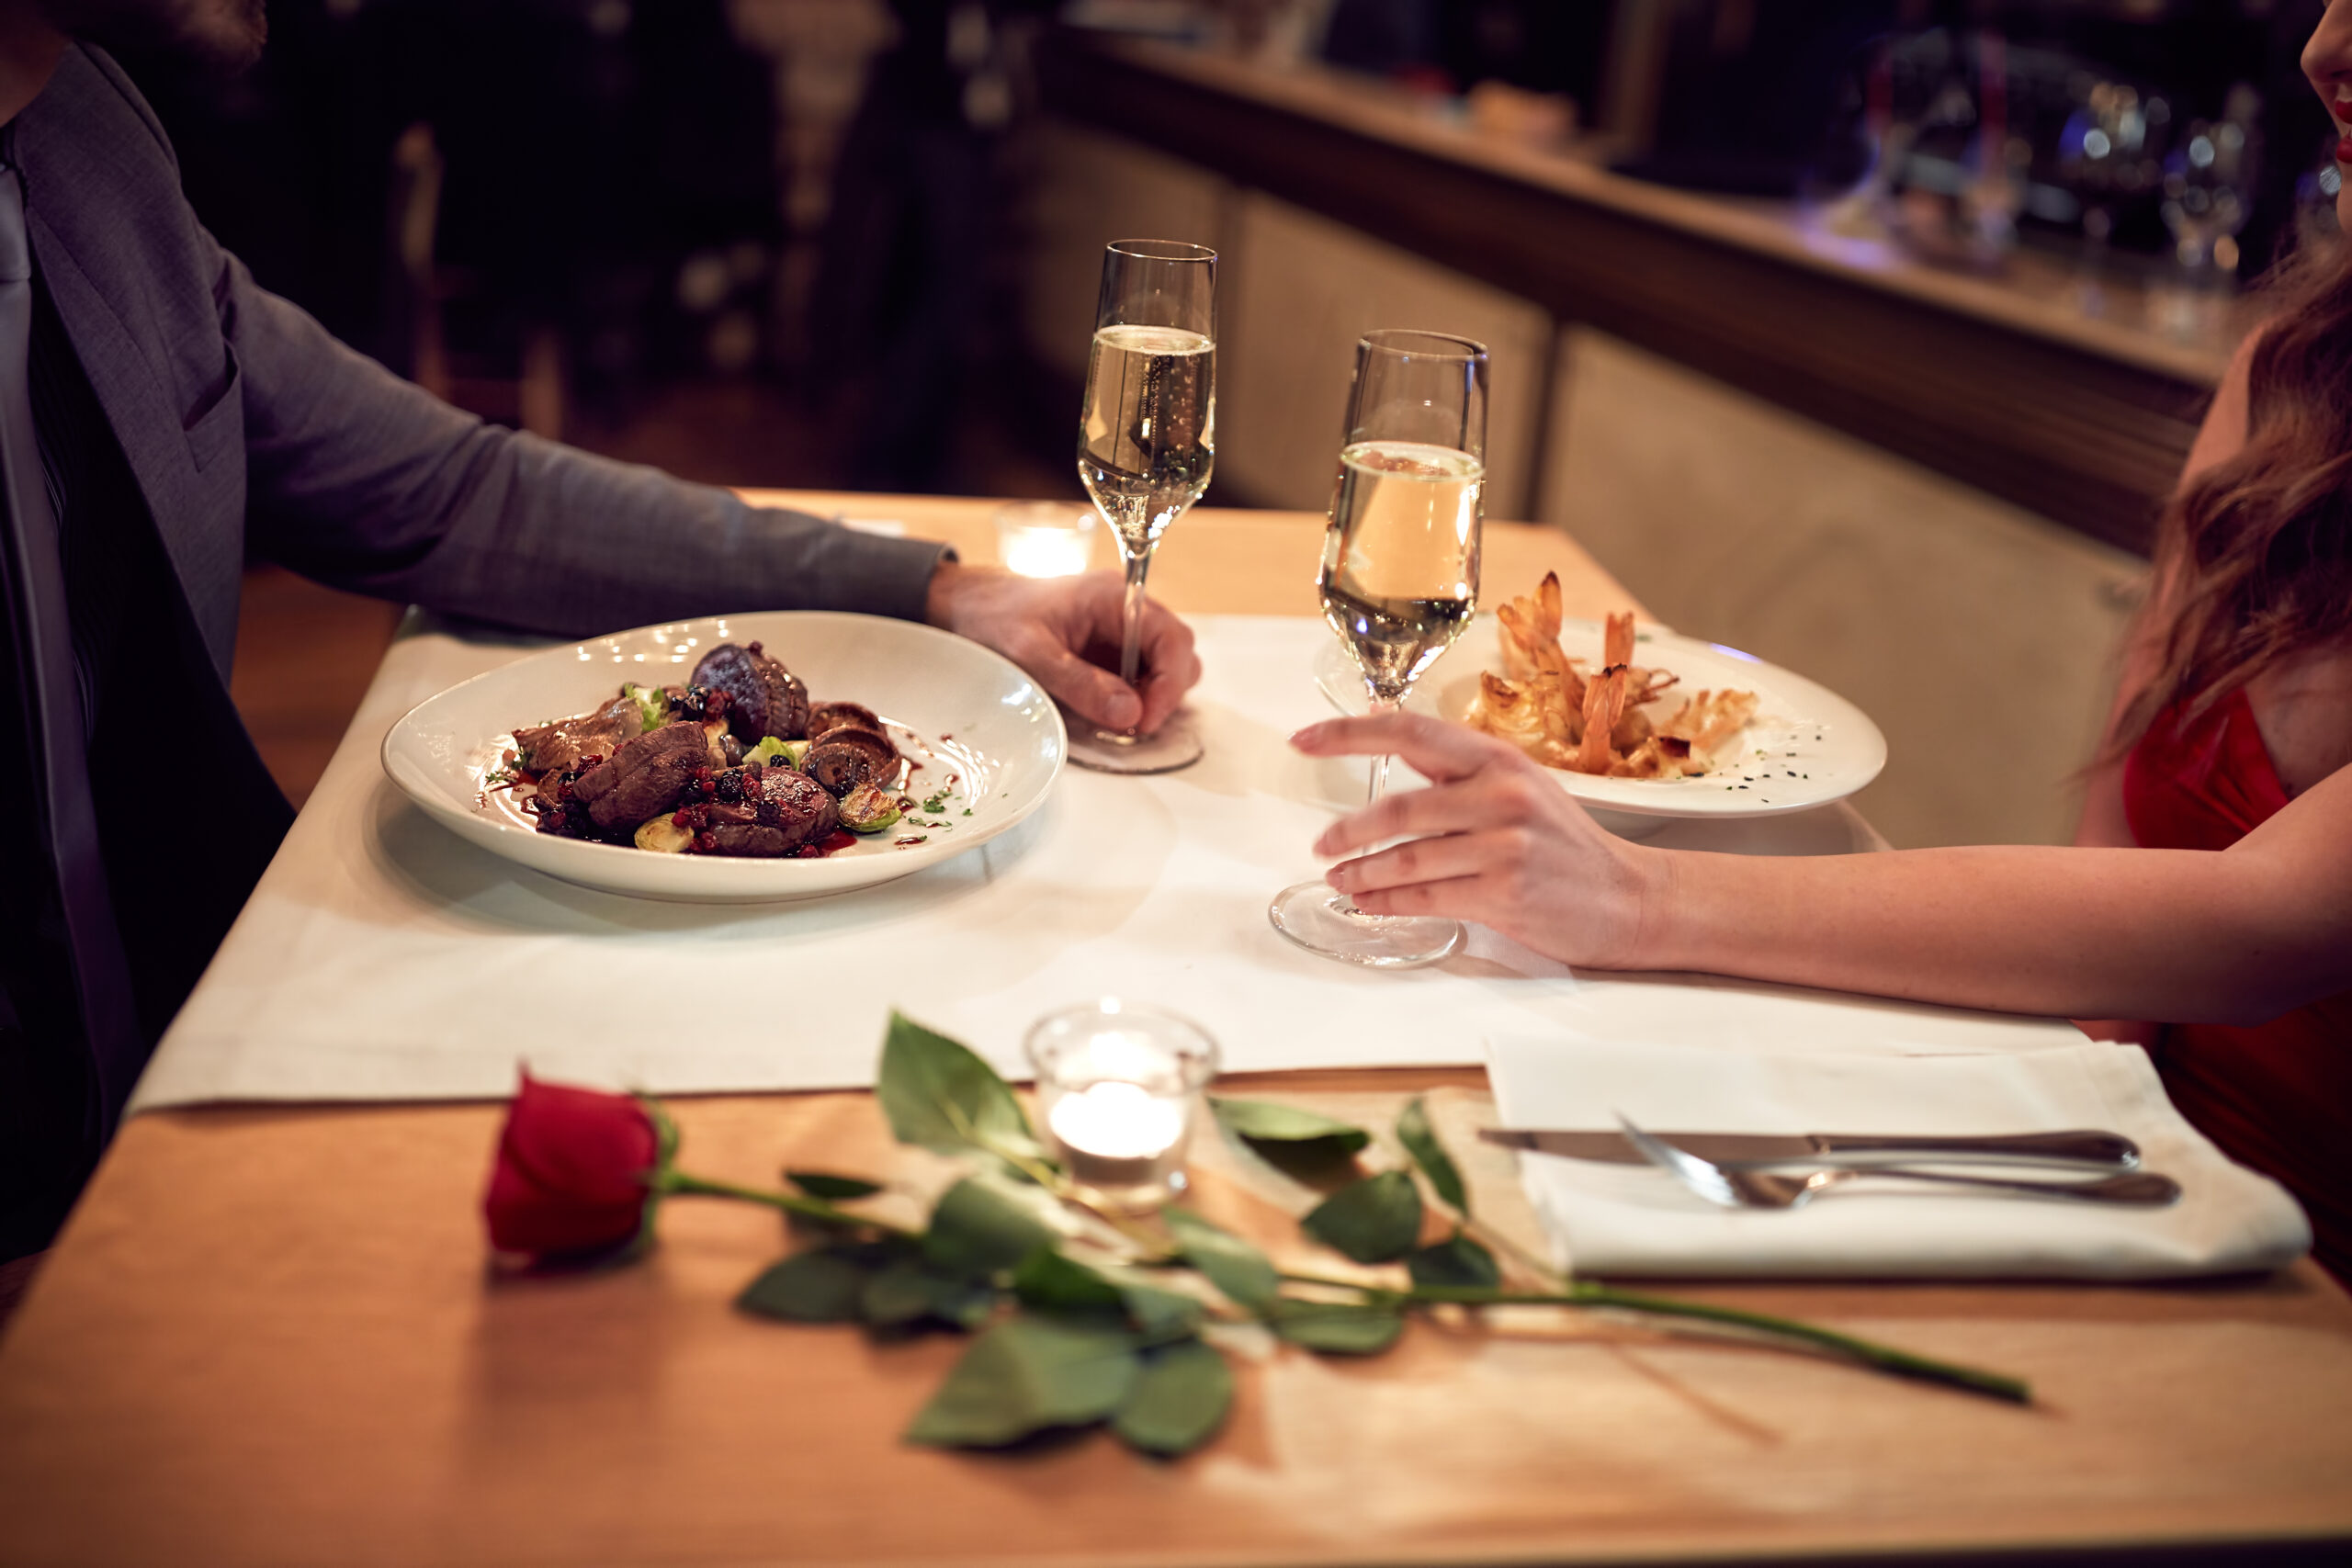 Make Your Next Date Night Unforgettable with Bektrom Foods